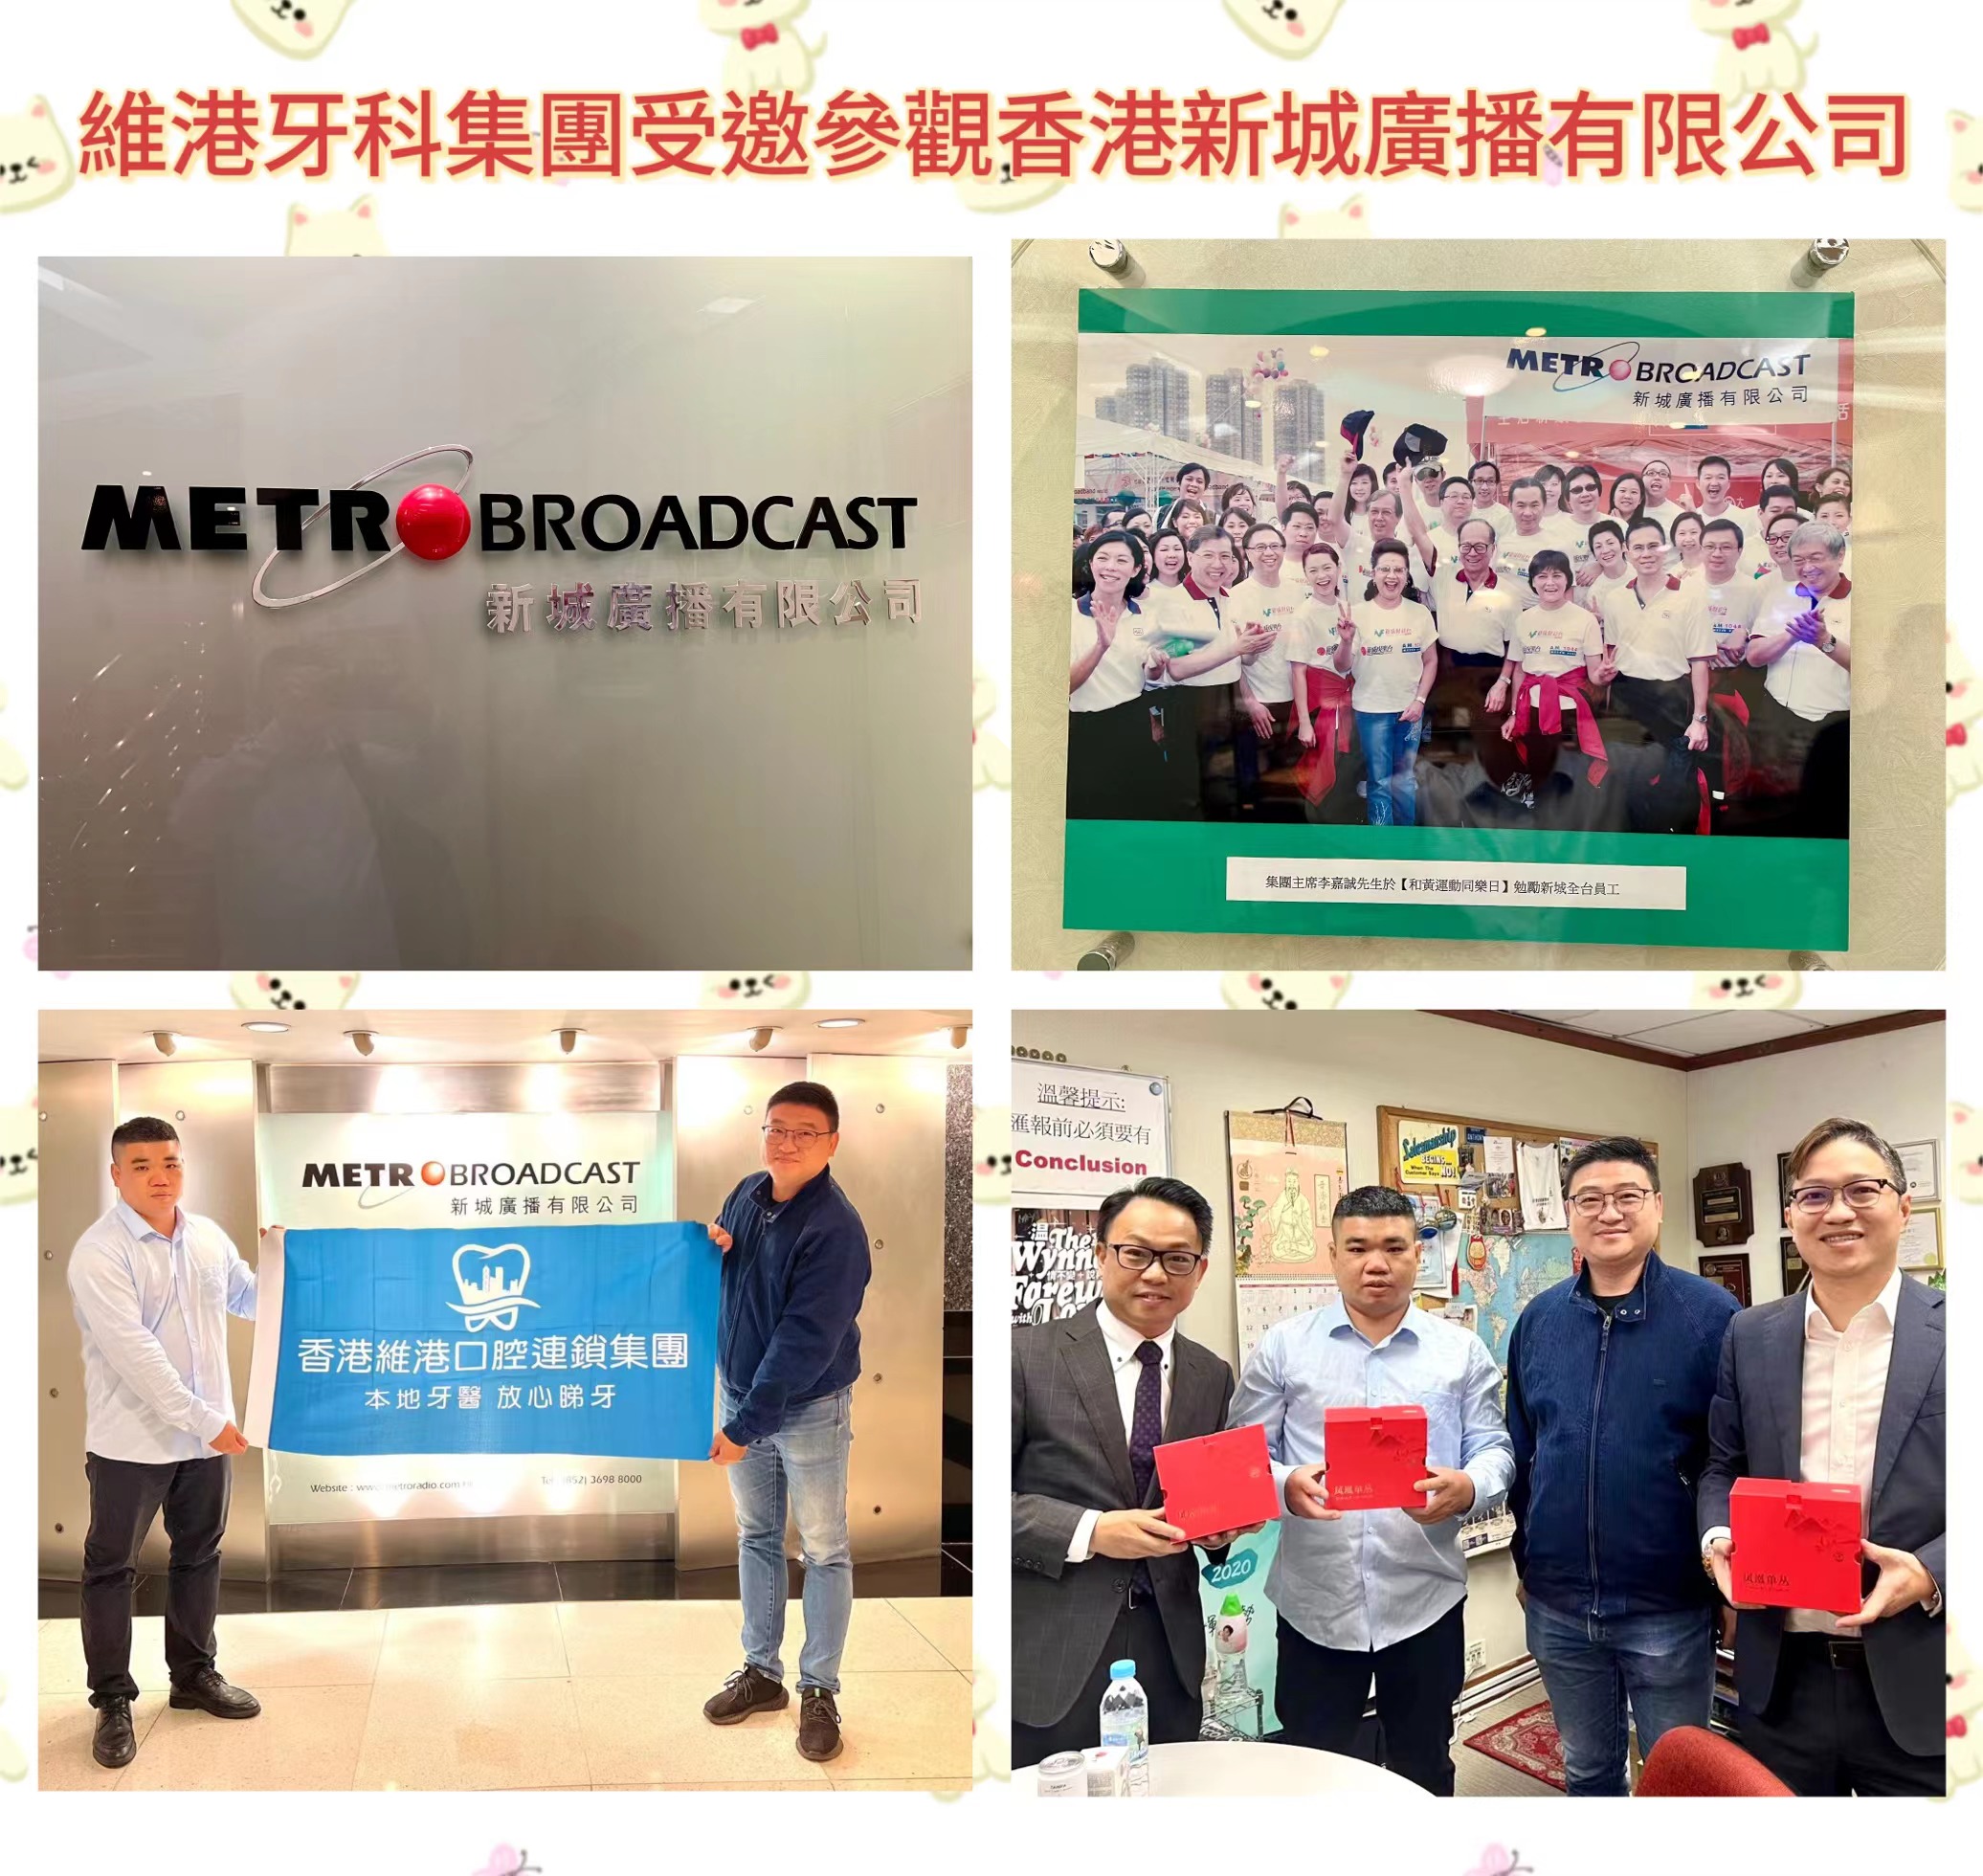 Vickong Dental Group was invited by Hong Kong New City Radio to visit and exchange ideas